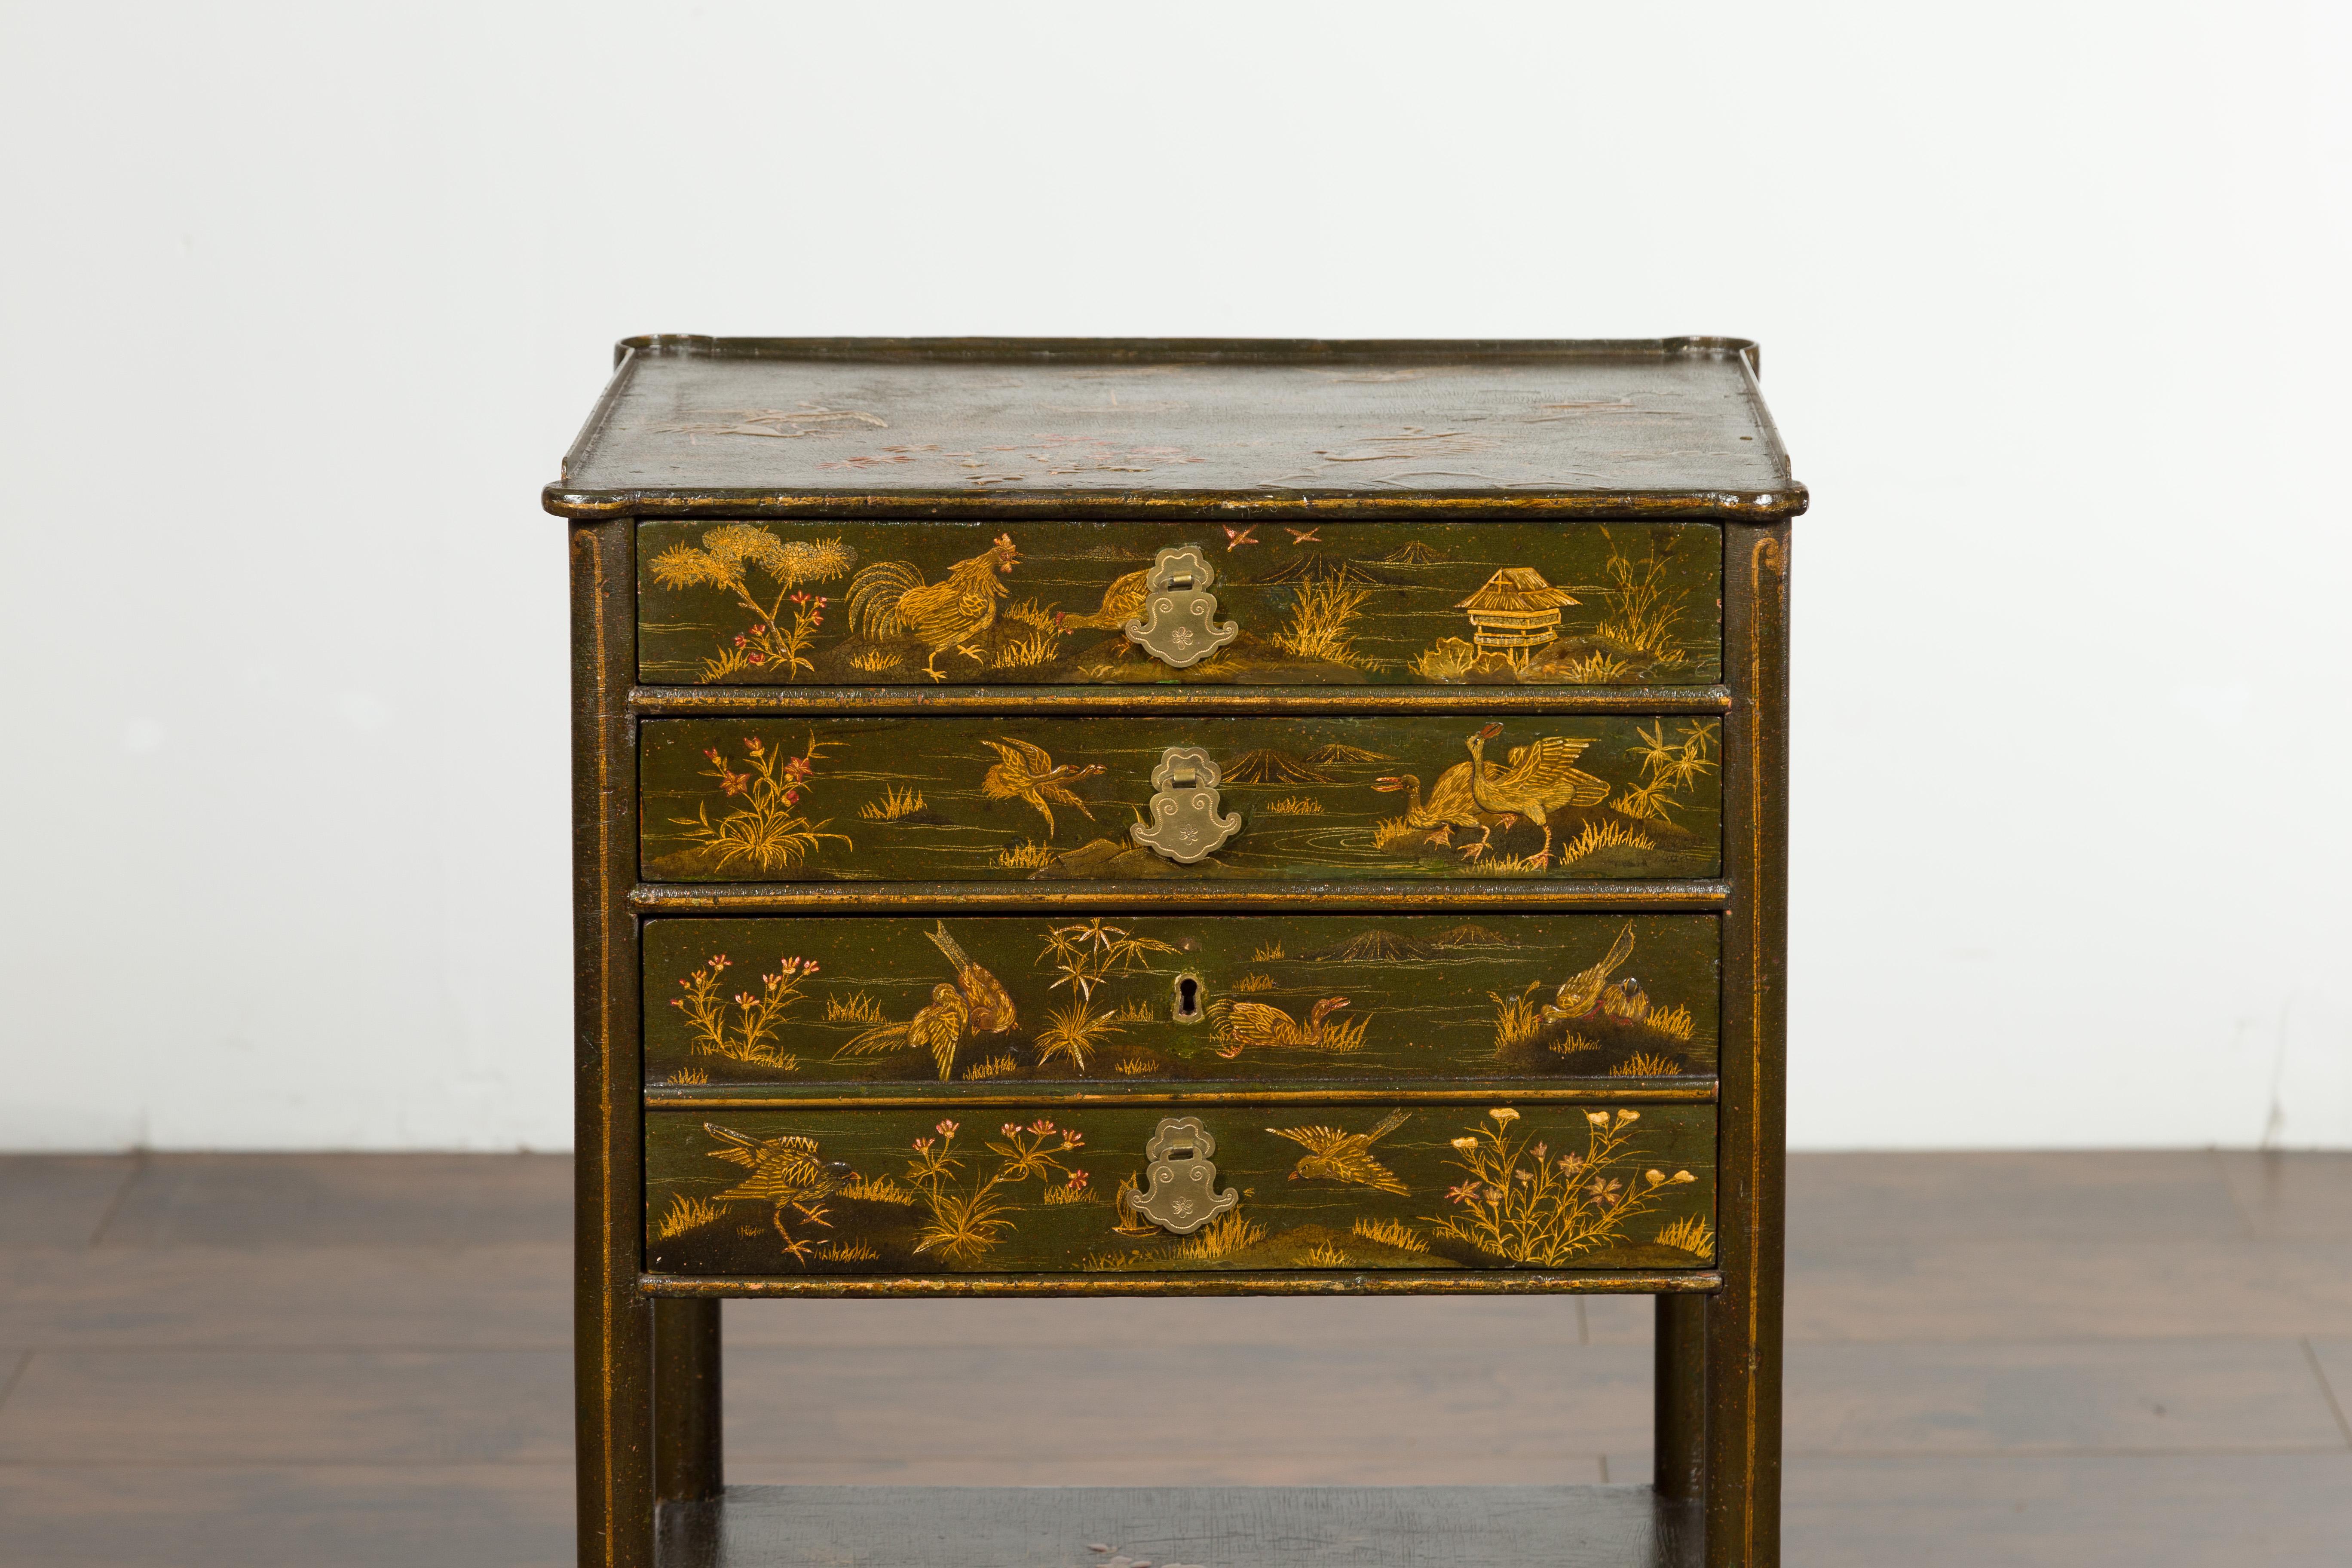 Wood English 19th Century Chinoiserie Table with Four Drawers, Shelf and Curving Legs